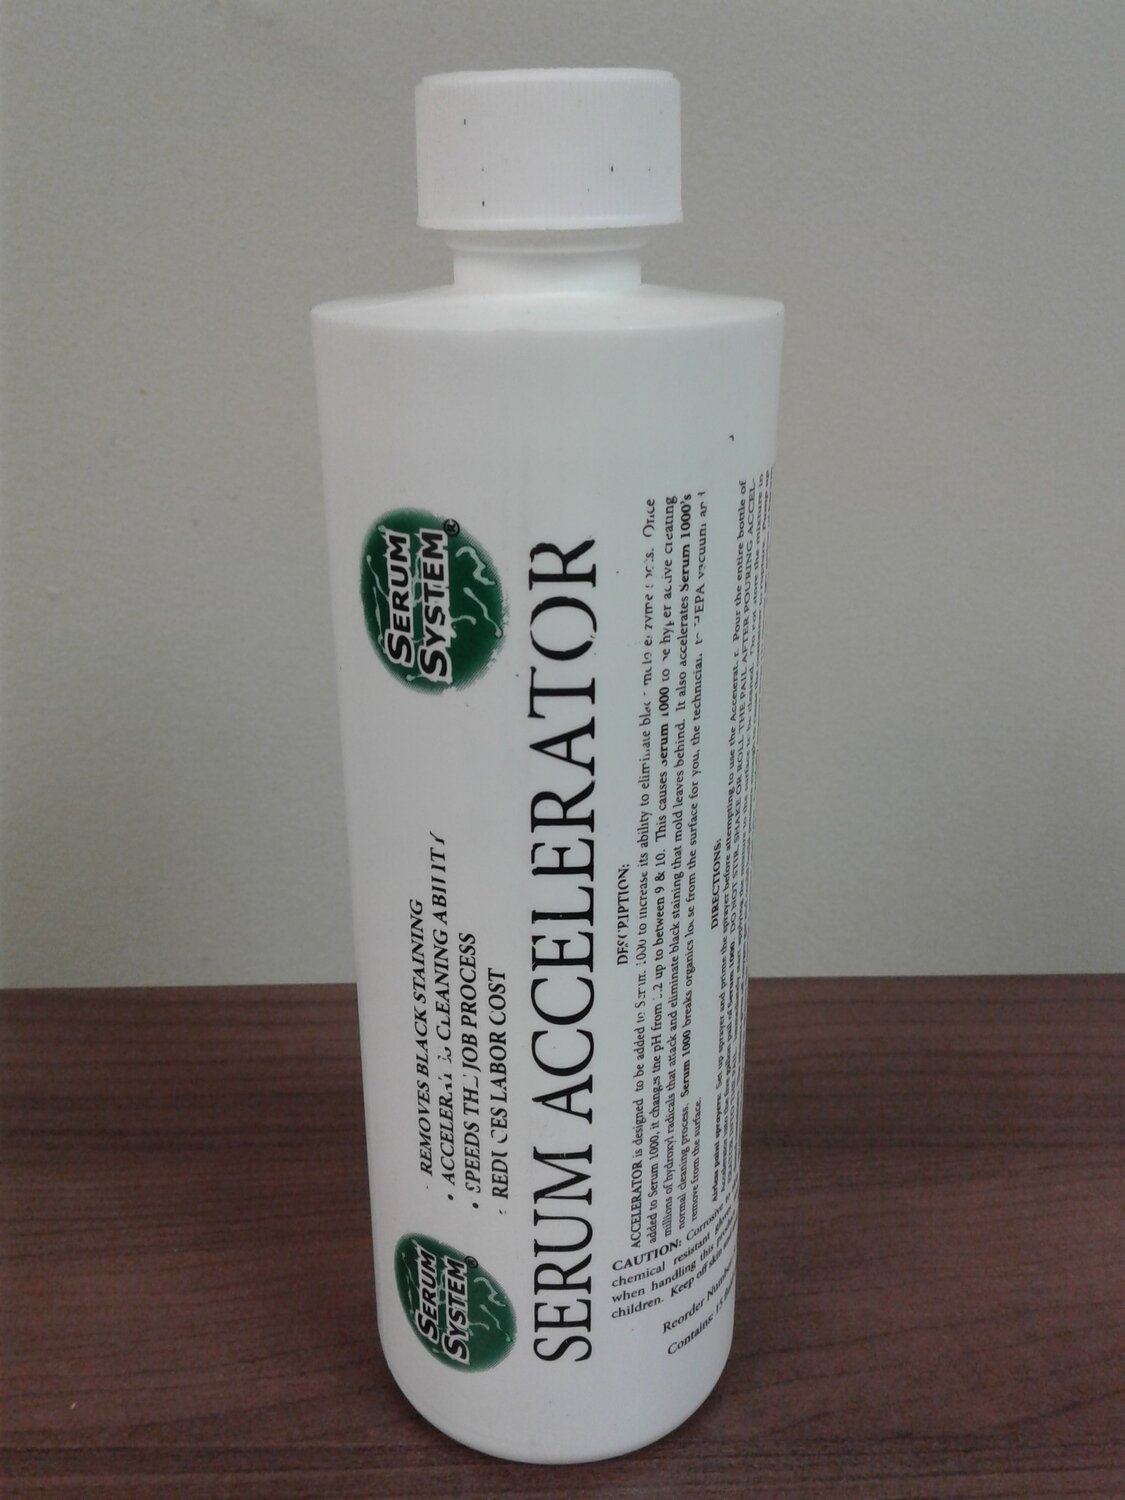 Serum 1000 Accelerator (15oz Bottle) by Serum Systems - Additive for Serum 1000